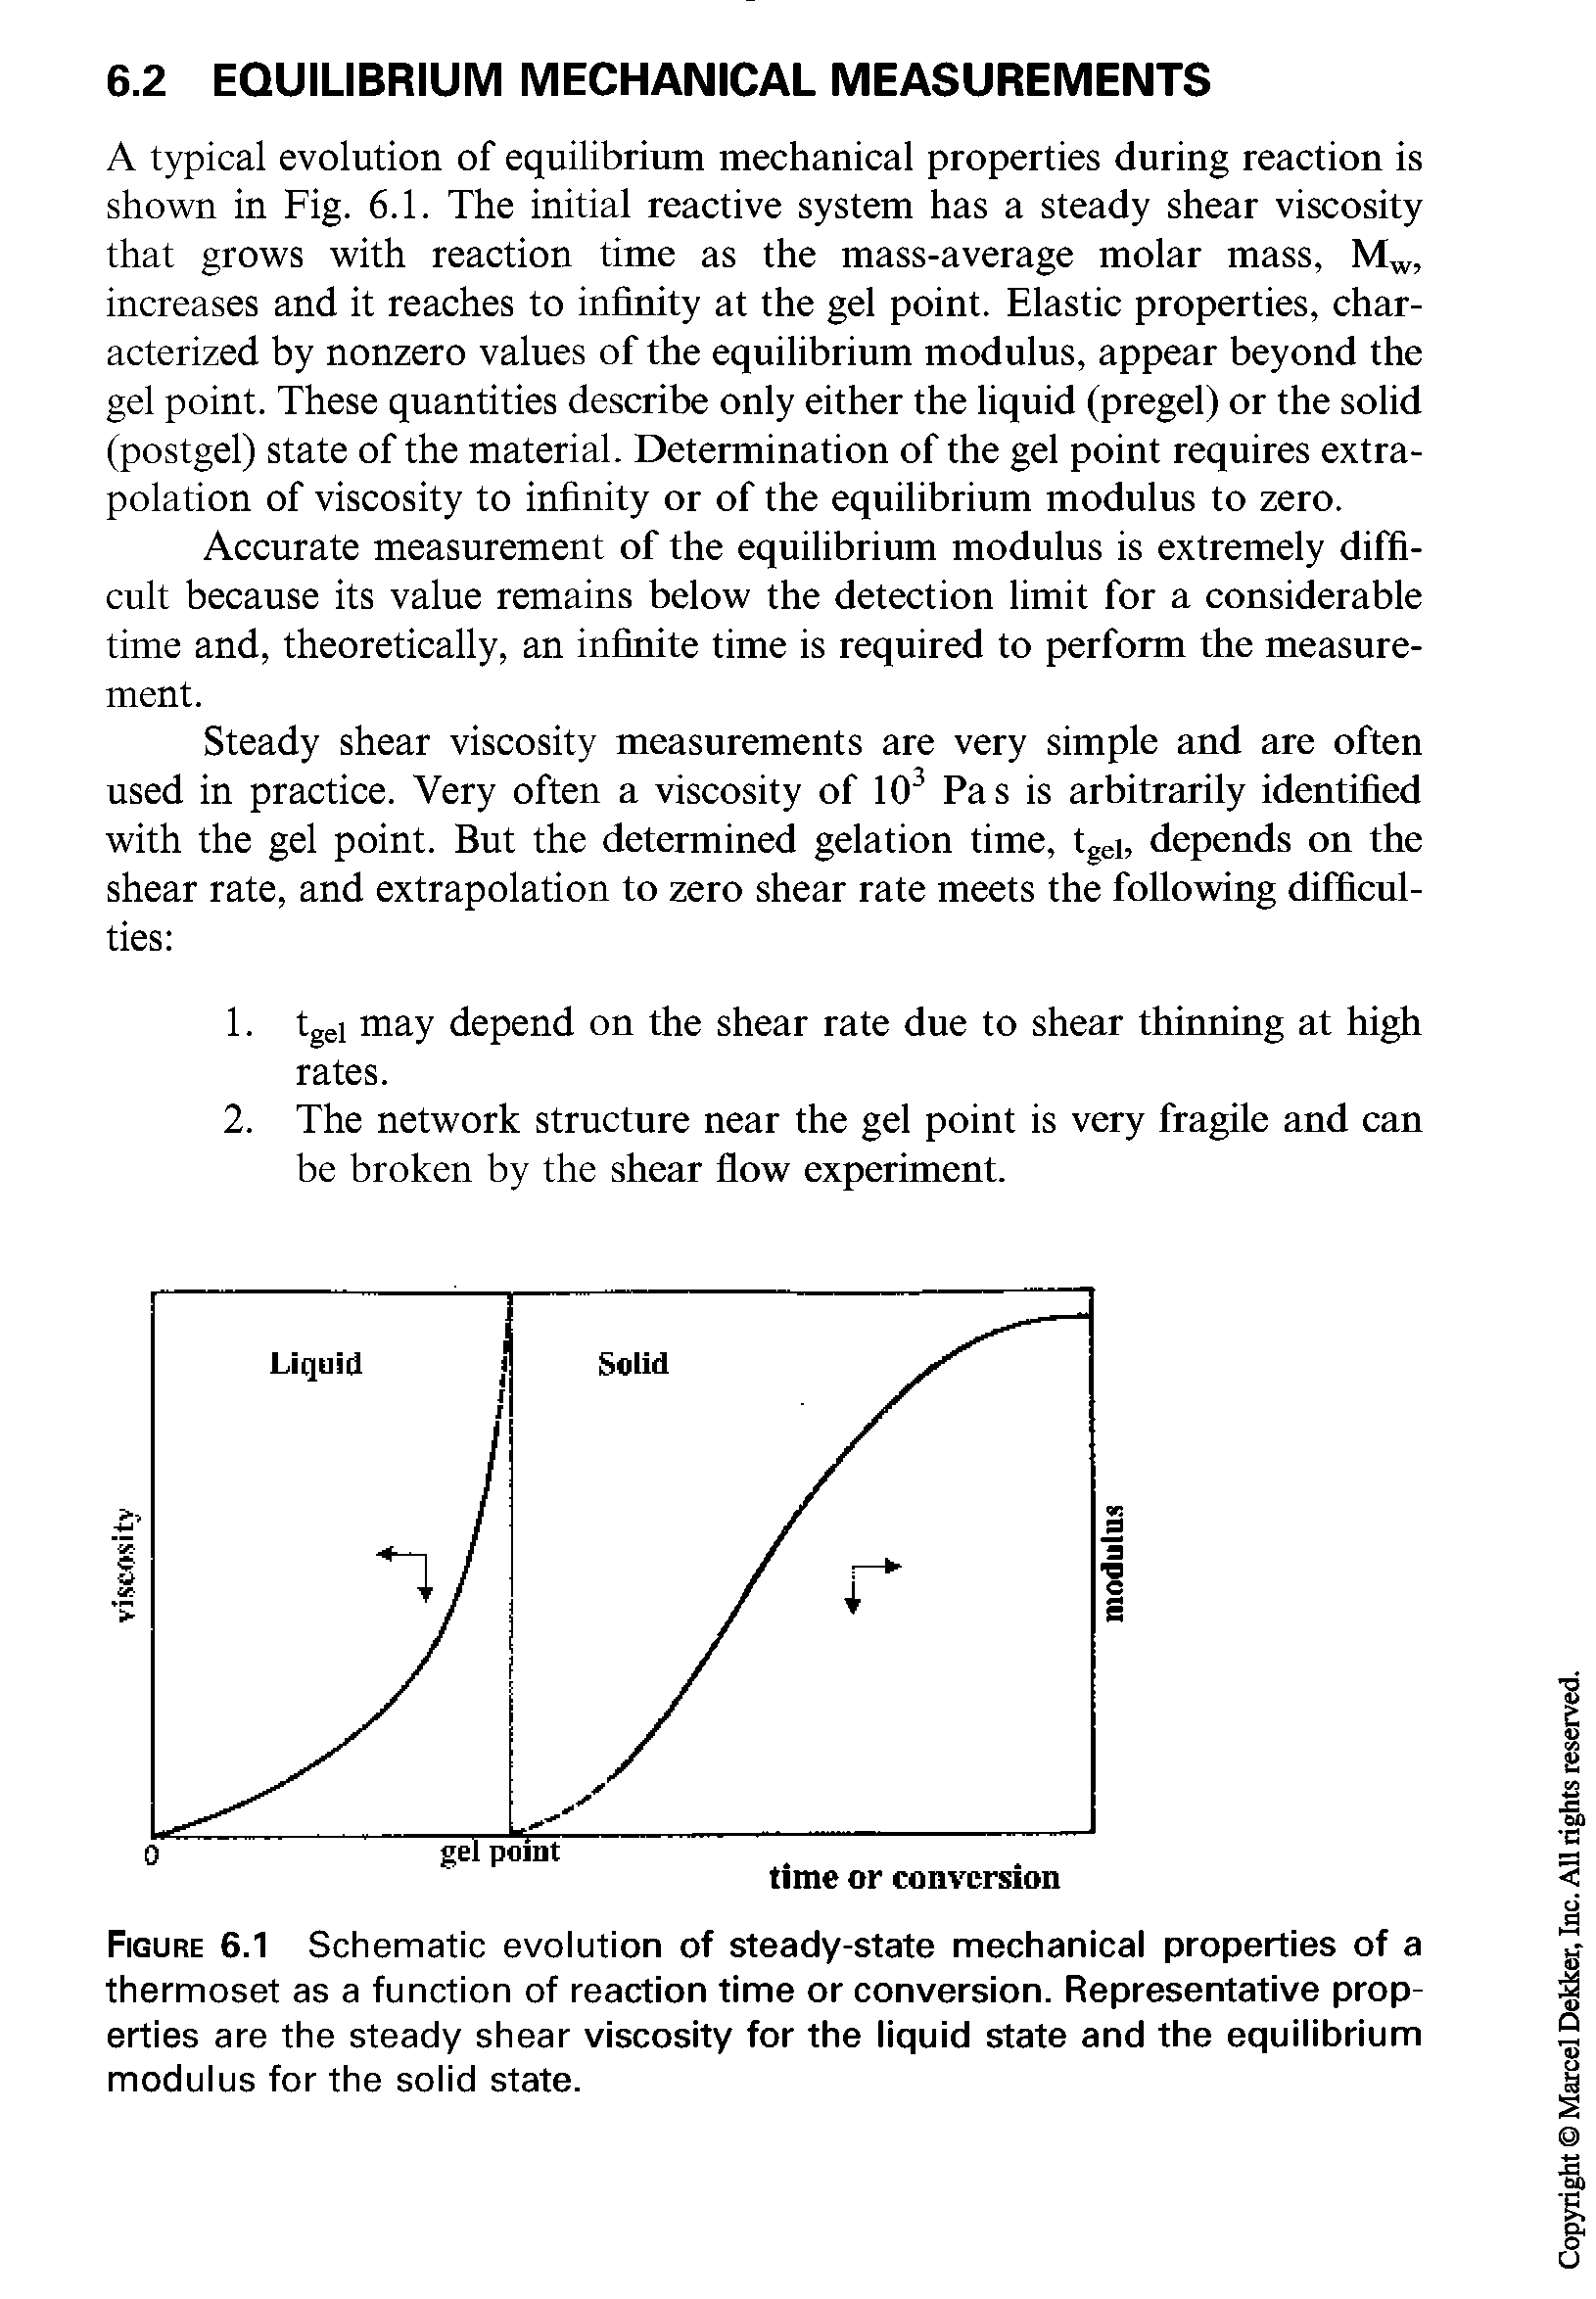 Figure 6.1 Schematic evolution of steady-state mechanical properties of a thermoset as a function of reaction time or conversion. Representative properties are the steady shear viscosity for the liquid state and the equilibrium modulus for the solid state.